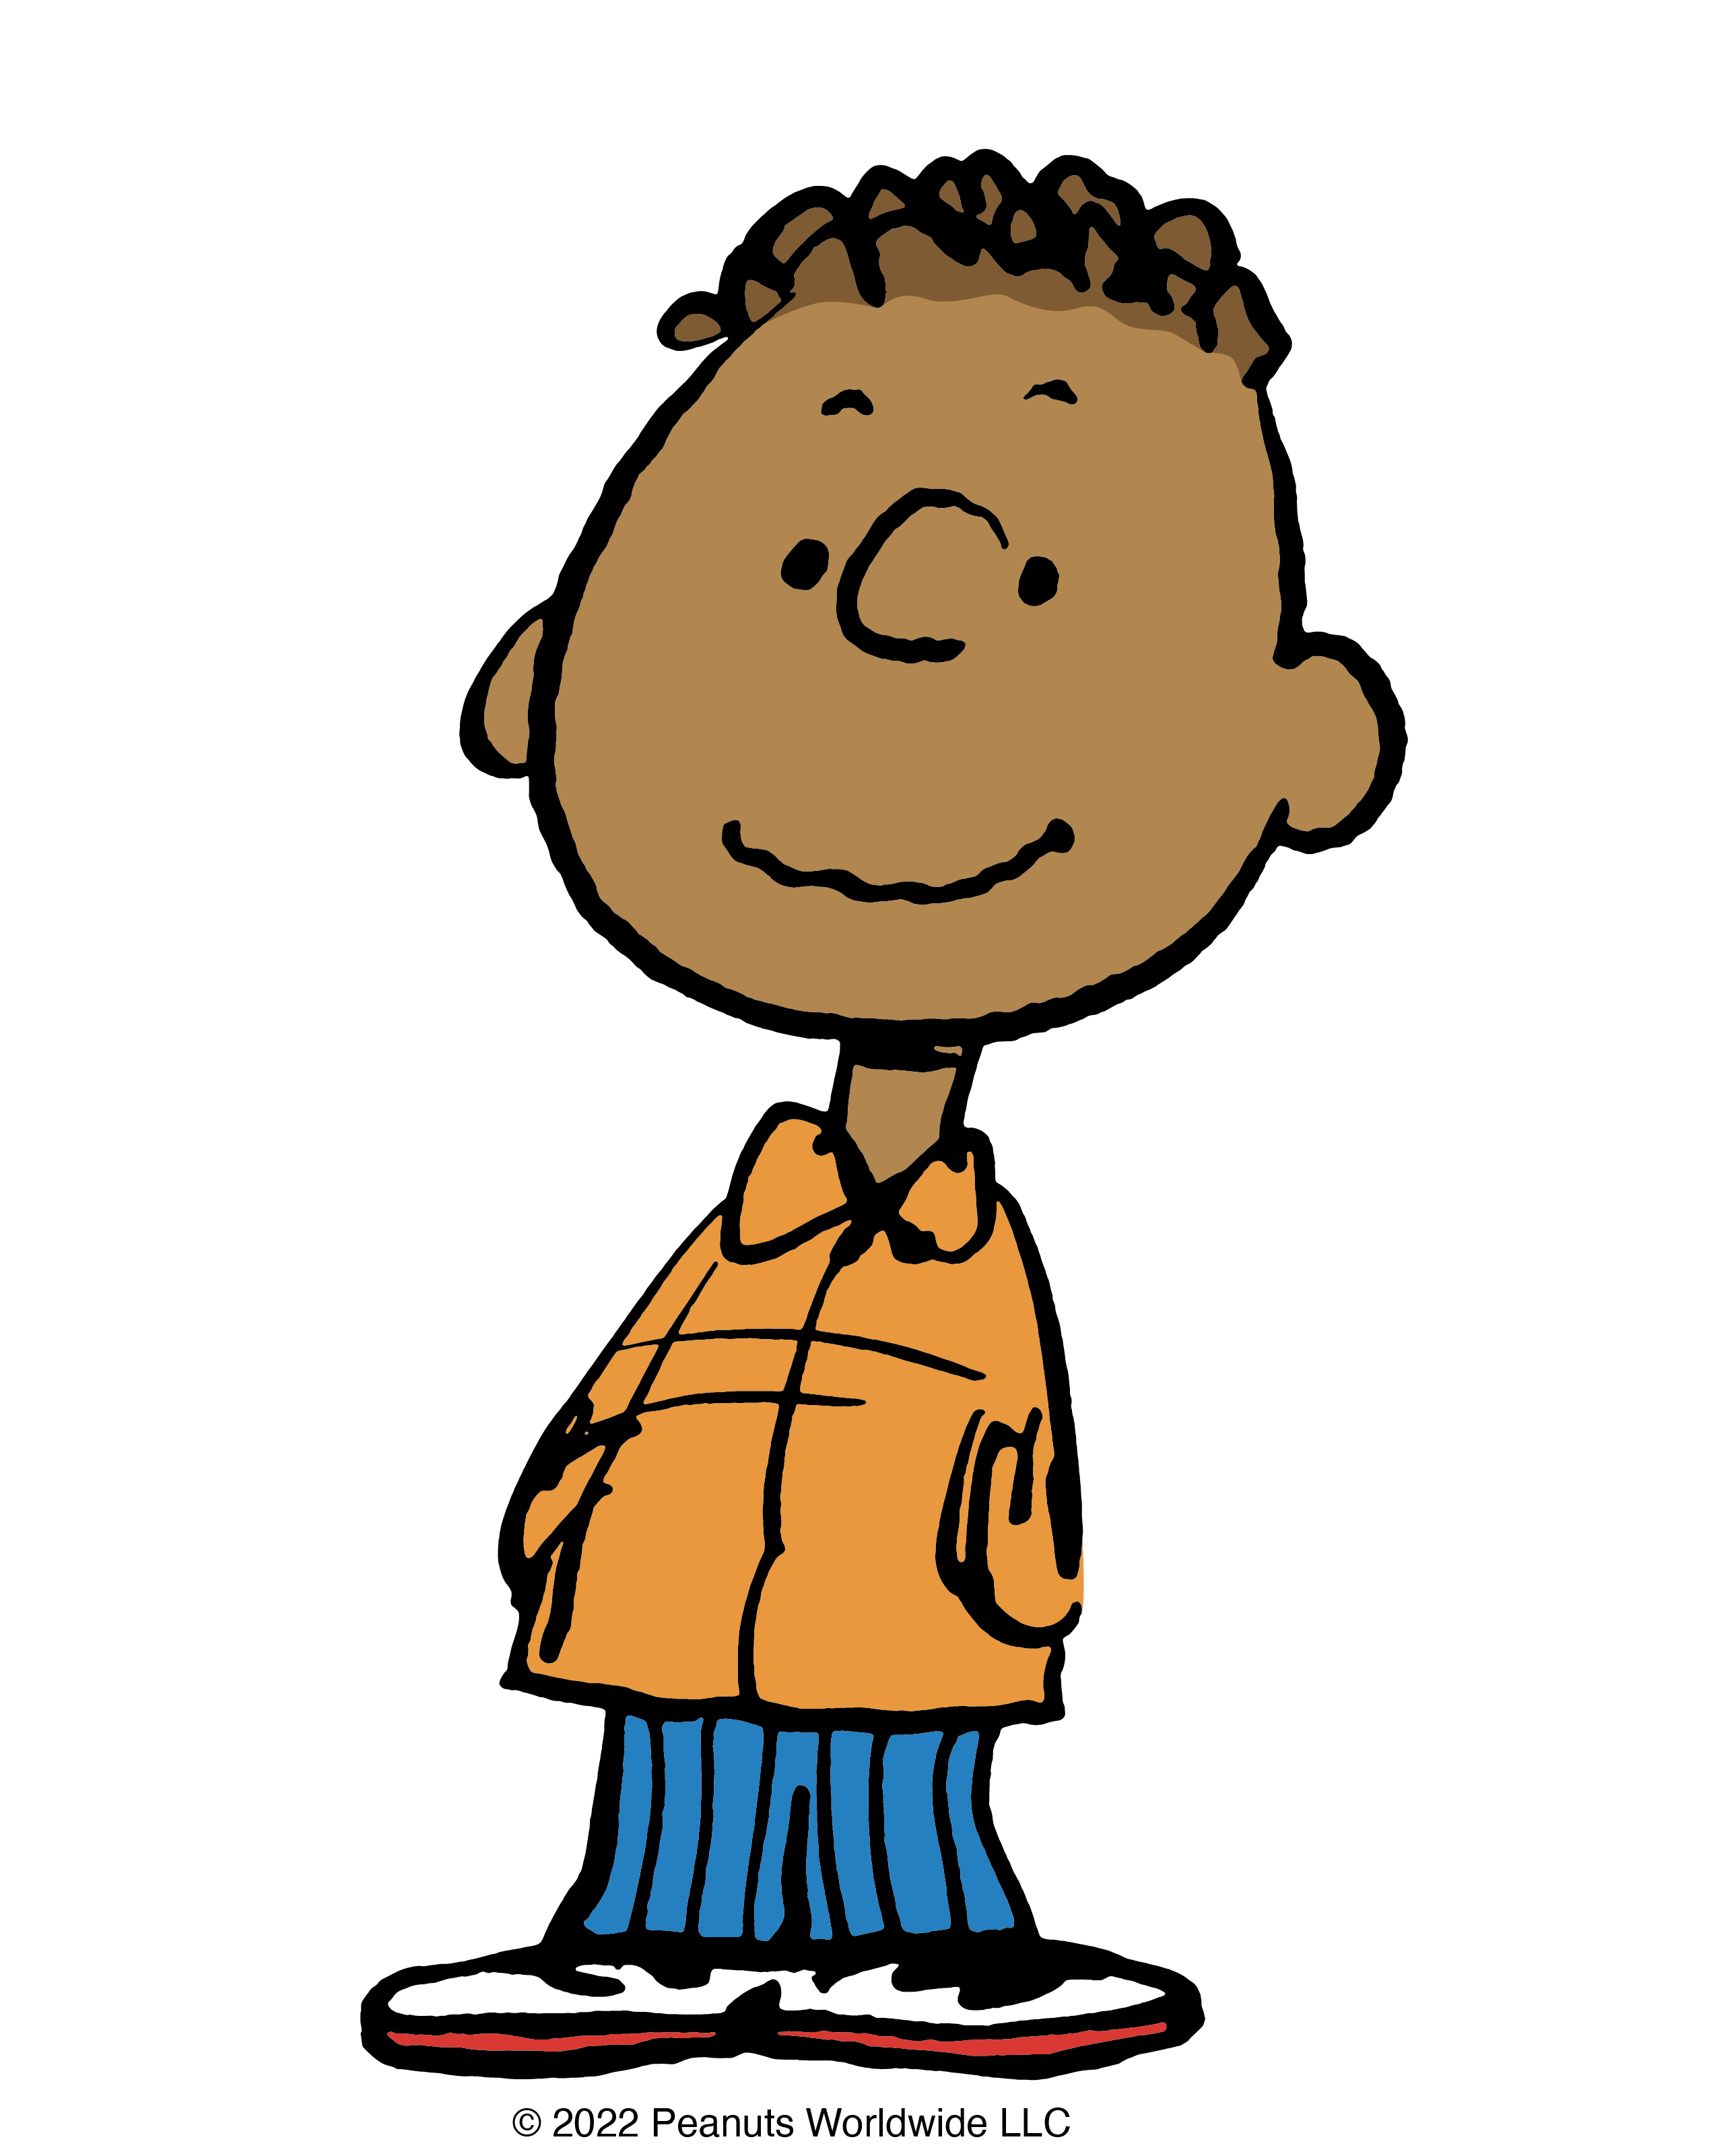 A project named for 'Peanuts' character Franklin aims to boost Black  animators - OPB